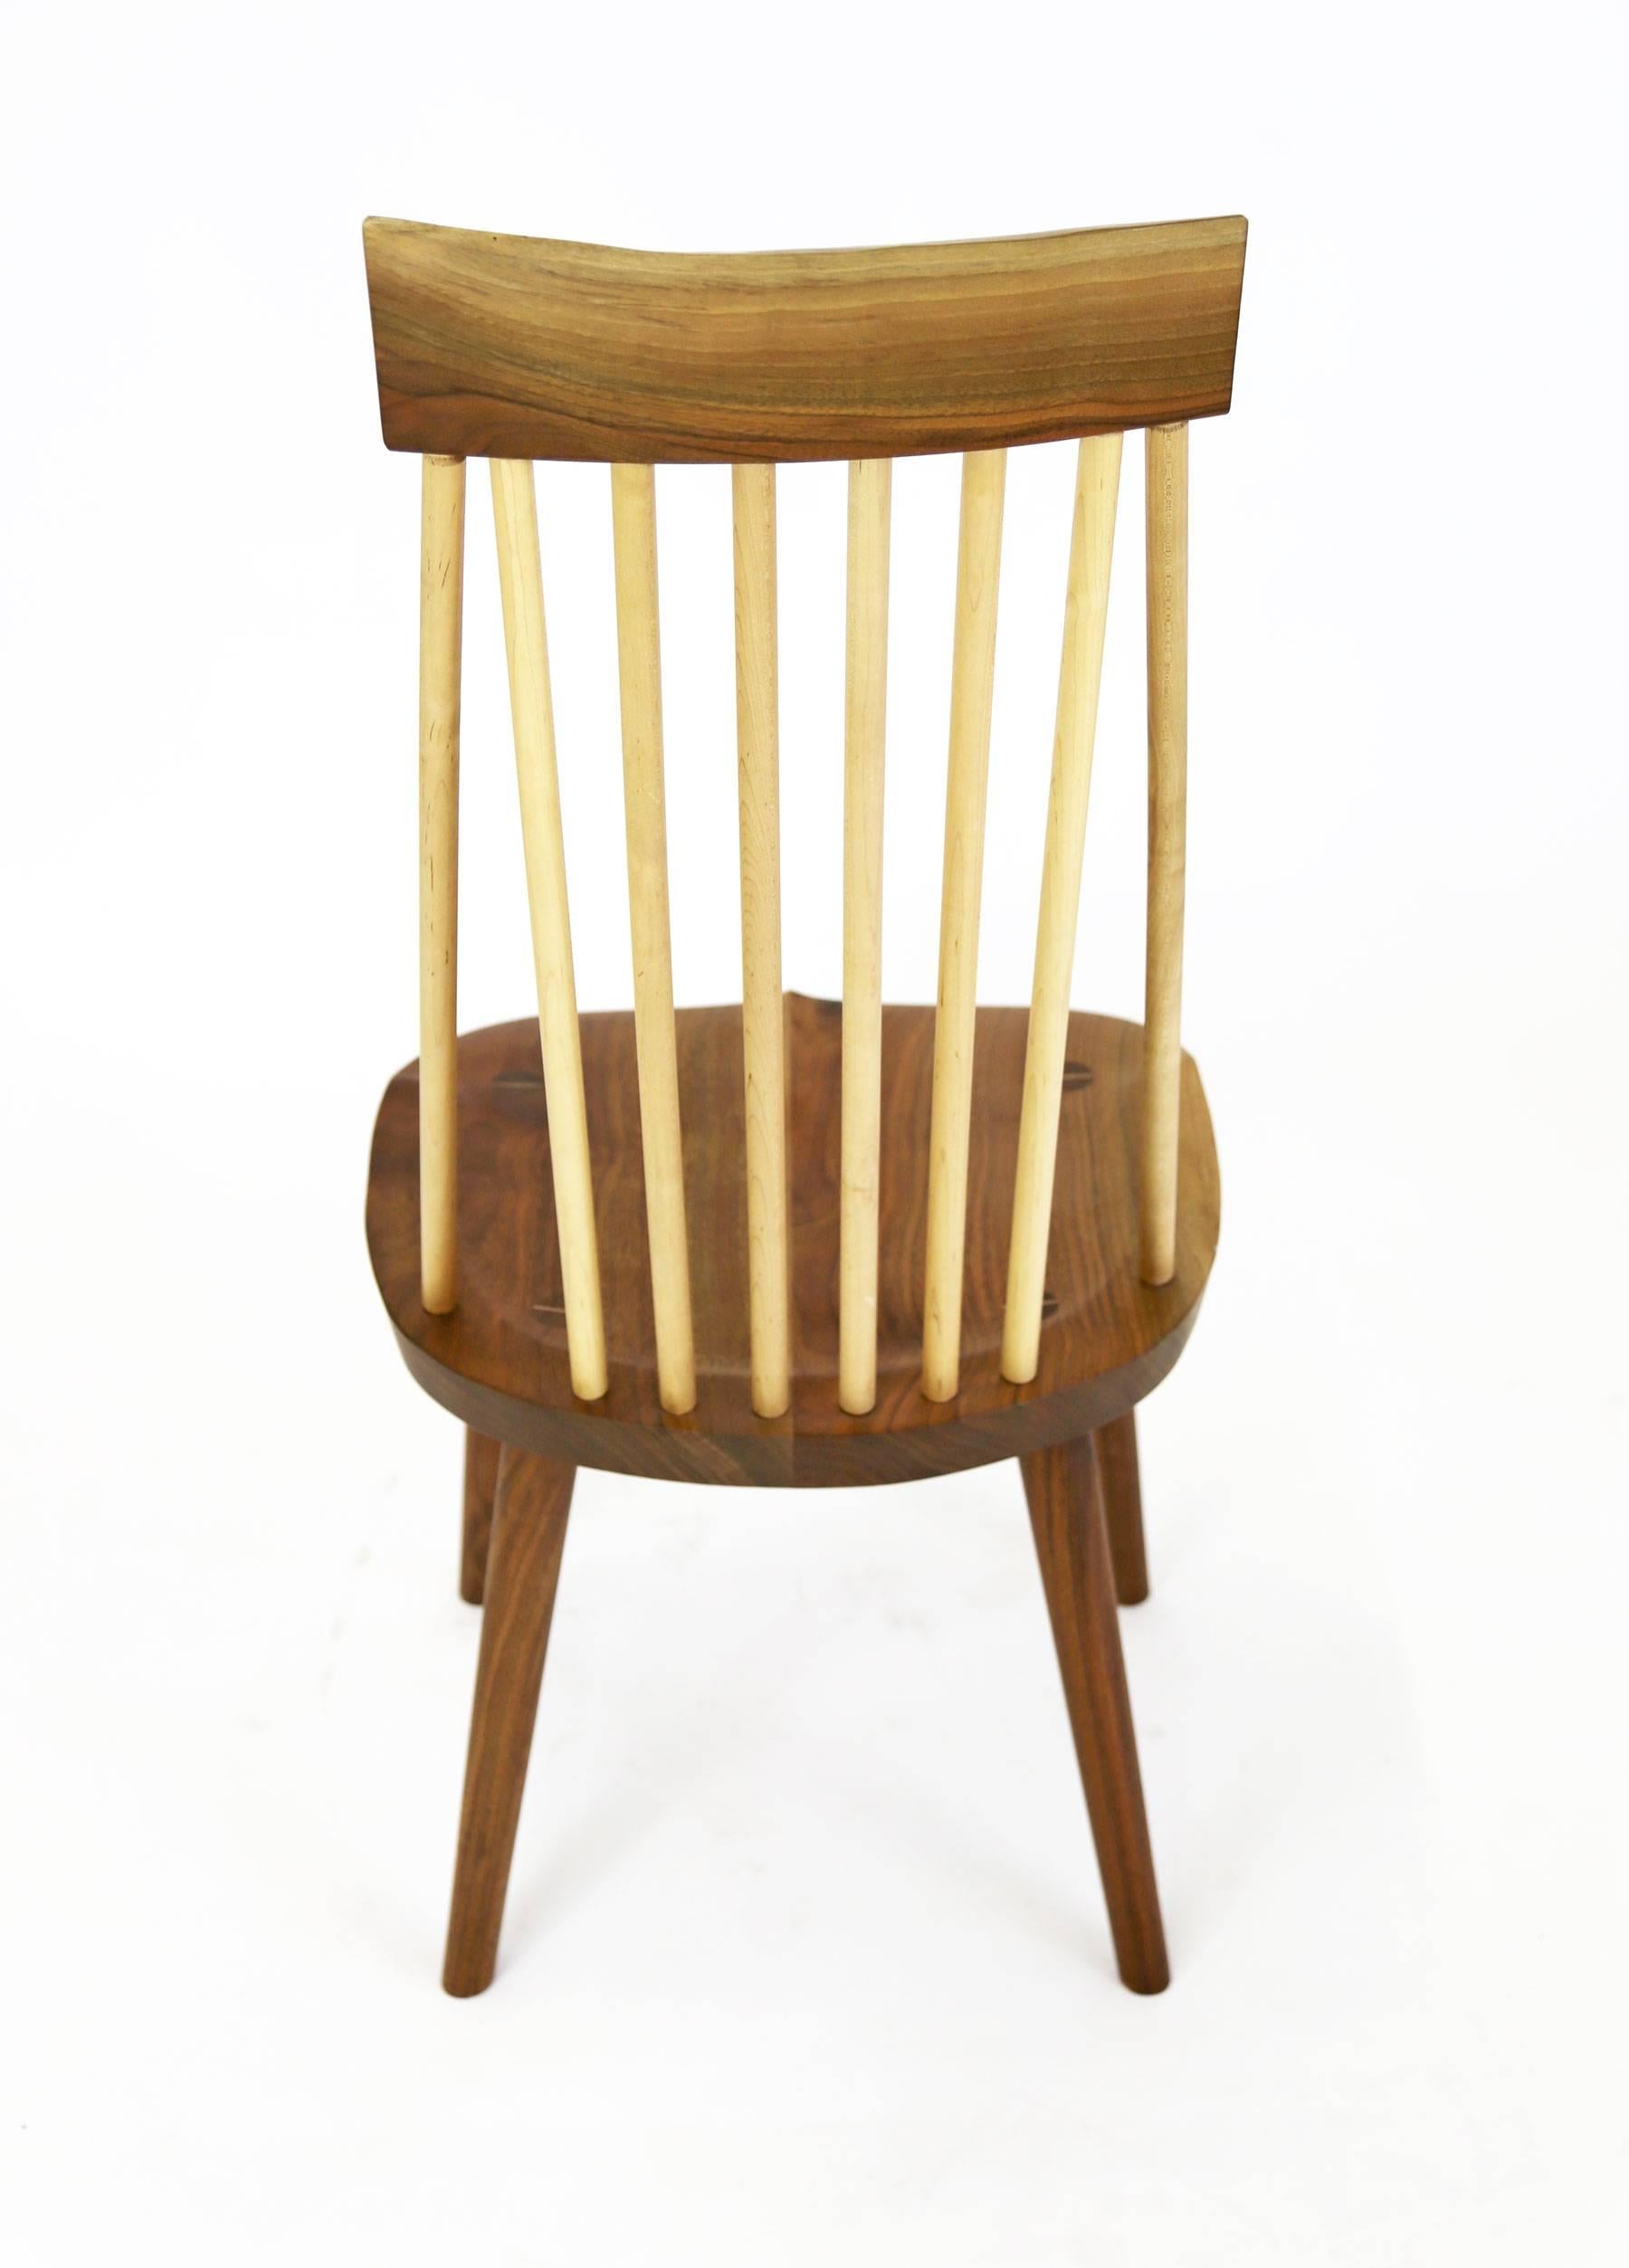 Shaker Style High Back Hardwood Chair in Walnut and Maple by Amish Woodworker (amerikanisch) im Angebot